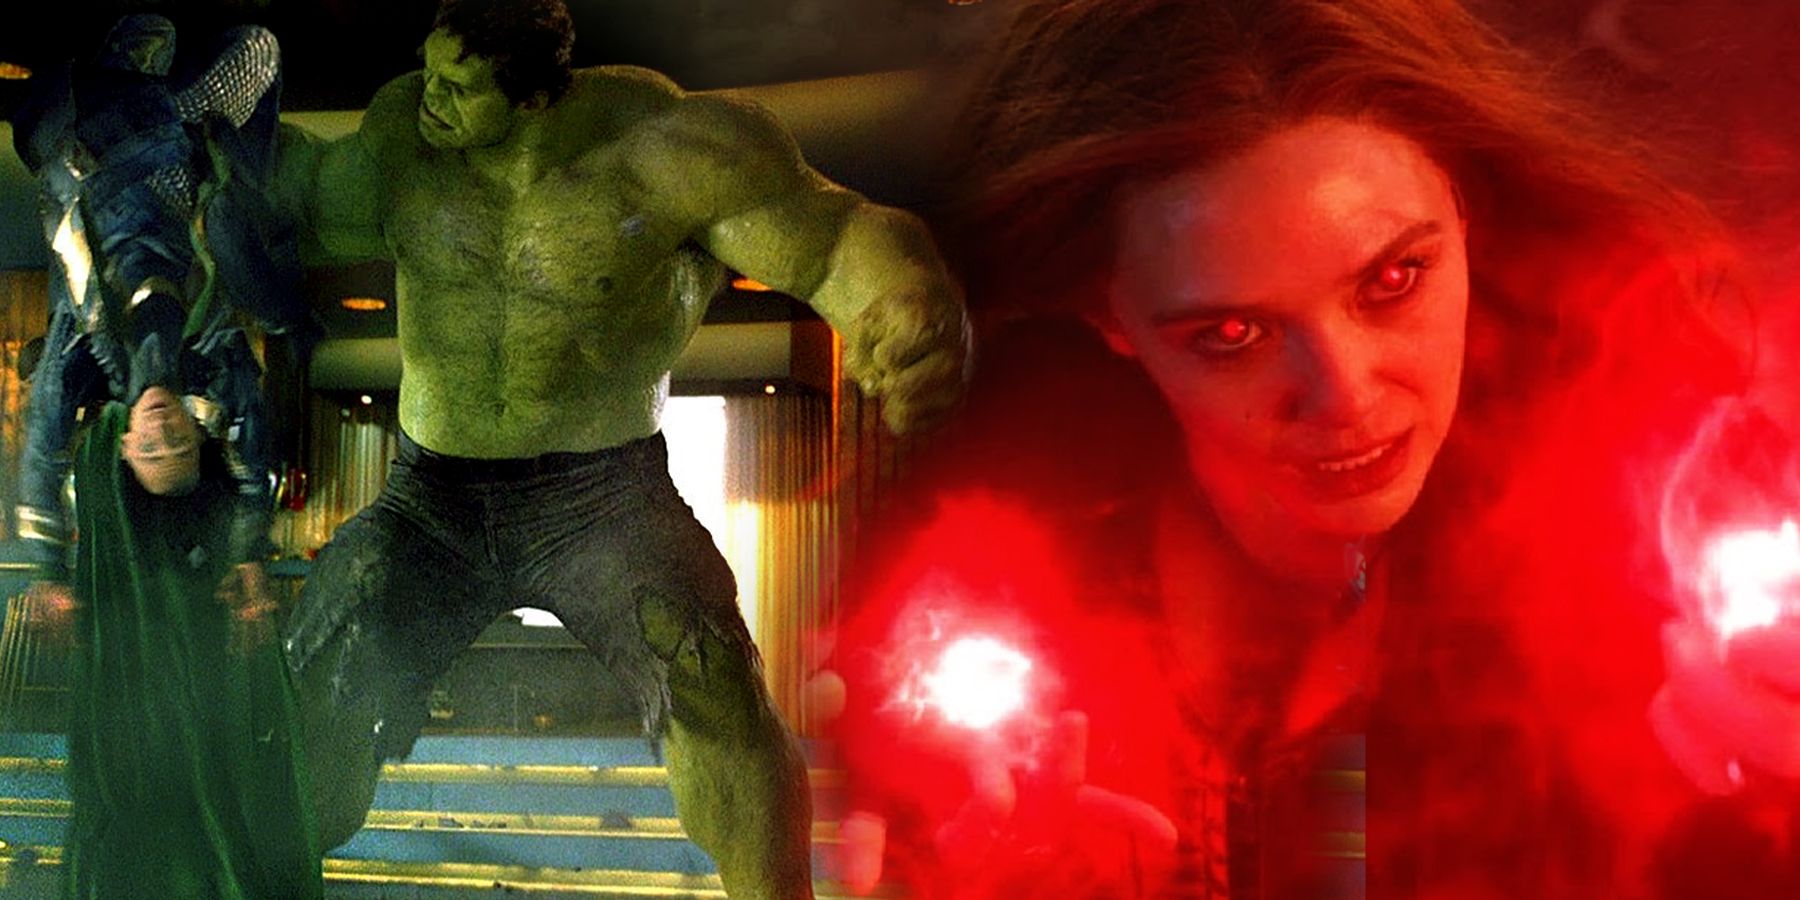 The Hulk beats up Loki in The Avengers and Scarlet Witch exudes her powers in Avengers: Endgame.